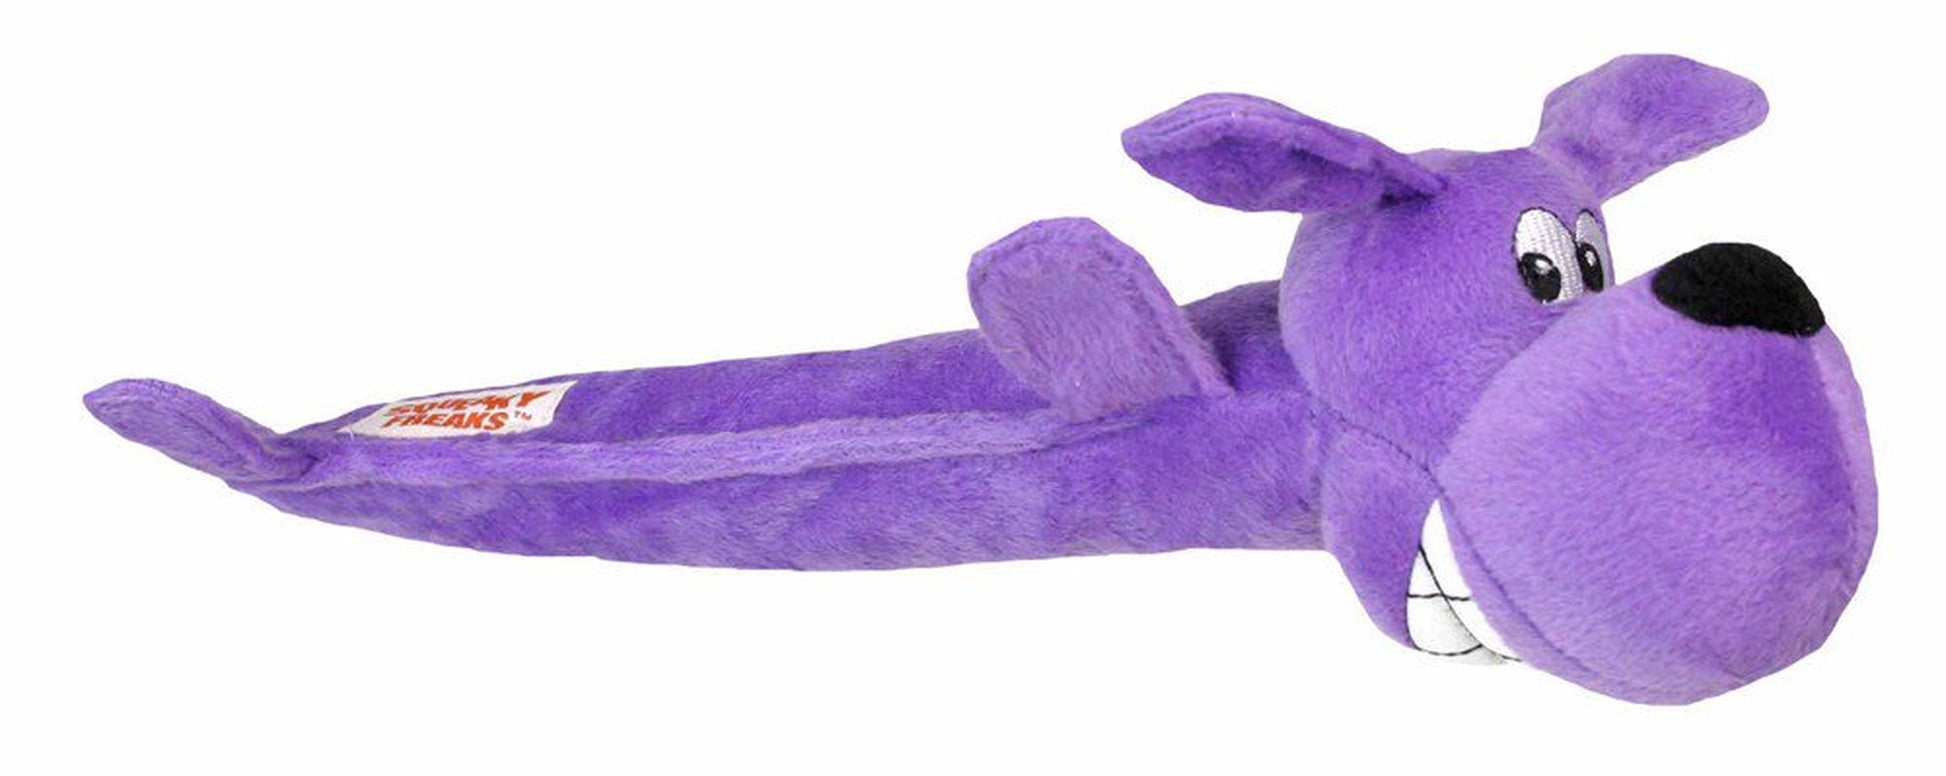 Mammoth Squeakies Interactive Plush Squeak Dog Toys, Small, 8", Assorted Colors